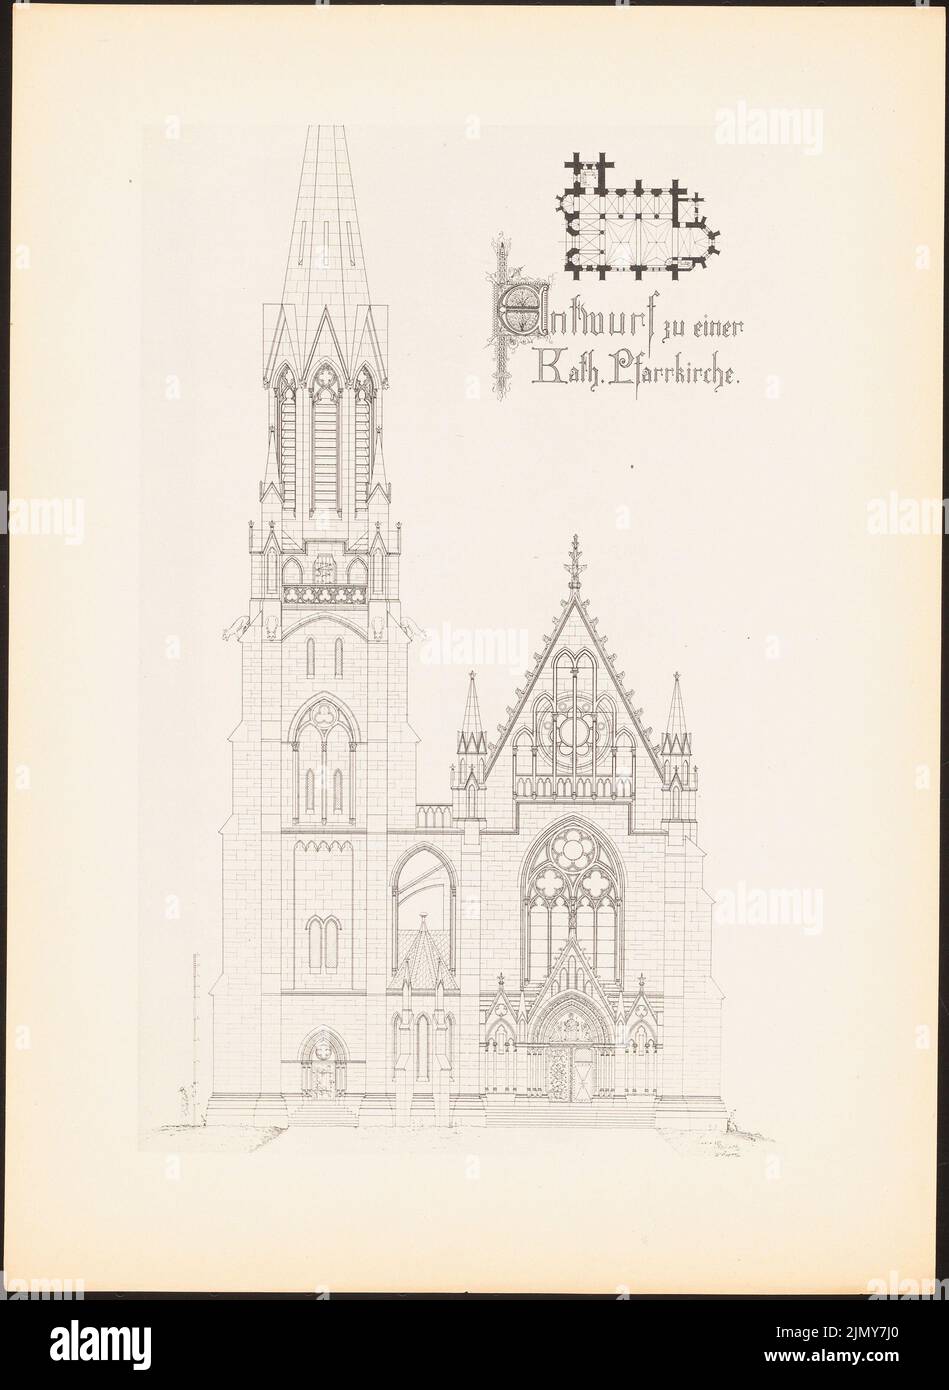 Fiebach Robert, Catholic parish church. (From: Prints of seminar works by the Royal Technical University of Berlin, Vol. I) (1890-1902): floor plan, view. Print on paper, 33.3 x 24.3 cm (including scan edges) Stock Photo